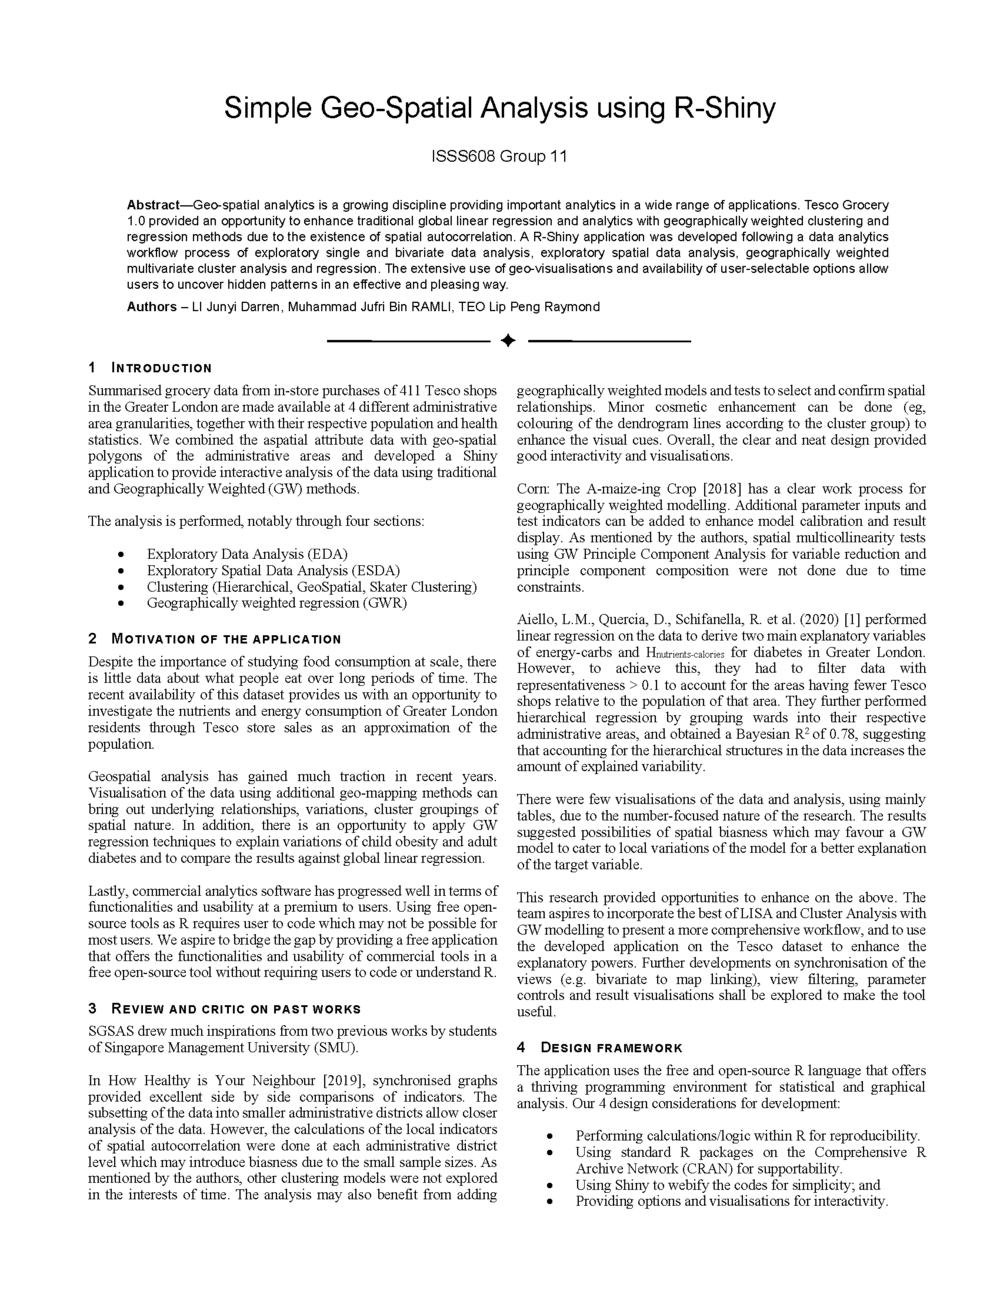 ISSS608G11 SGSAS ResearchPaper Page 1.png